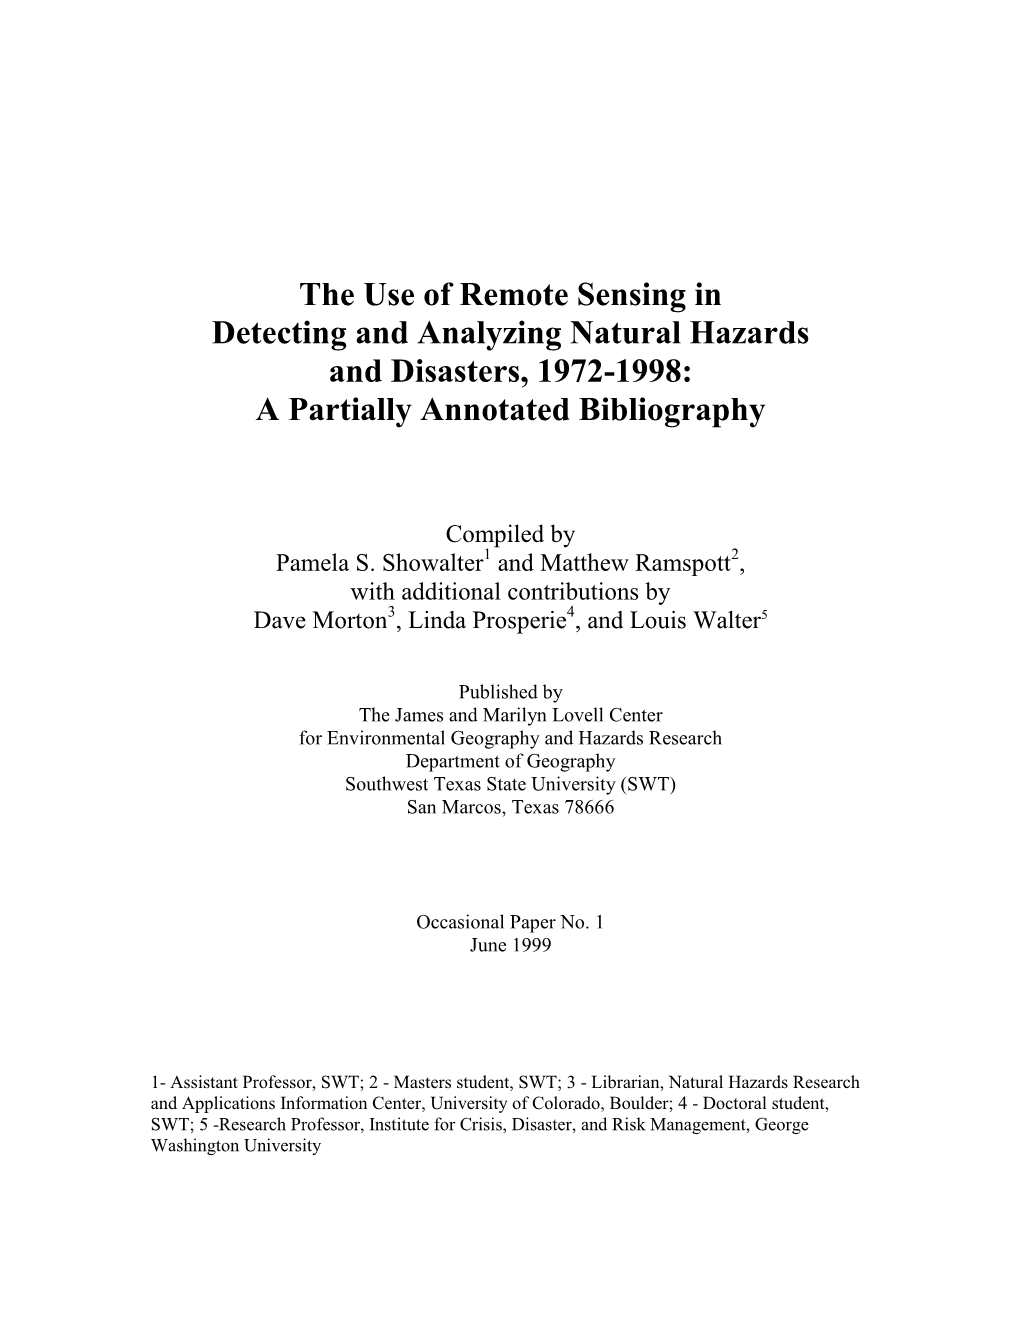 Use of Remote Sensing in Detecting and Analyzing Natural Hazards and Disasters, 1972-1998: a Partially Annotated Bibliography